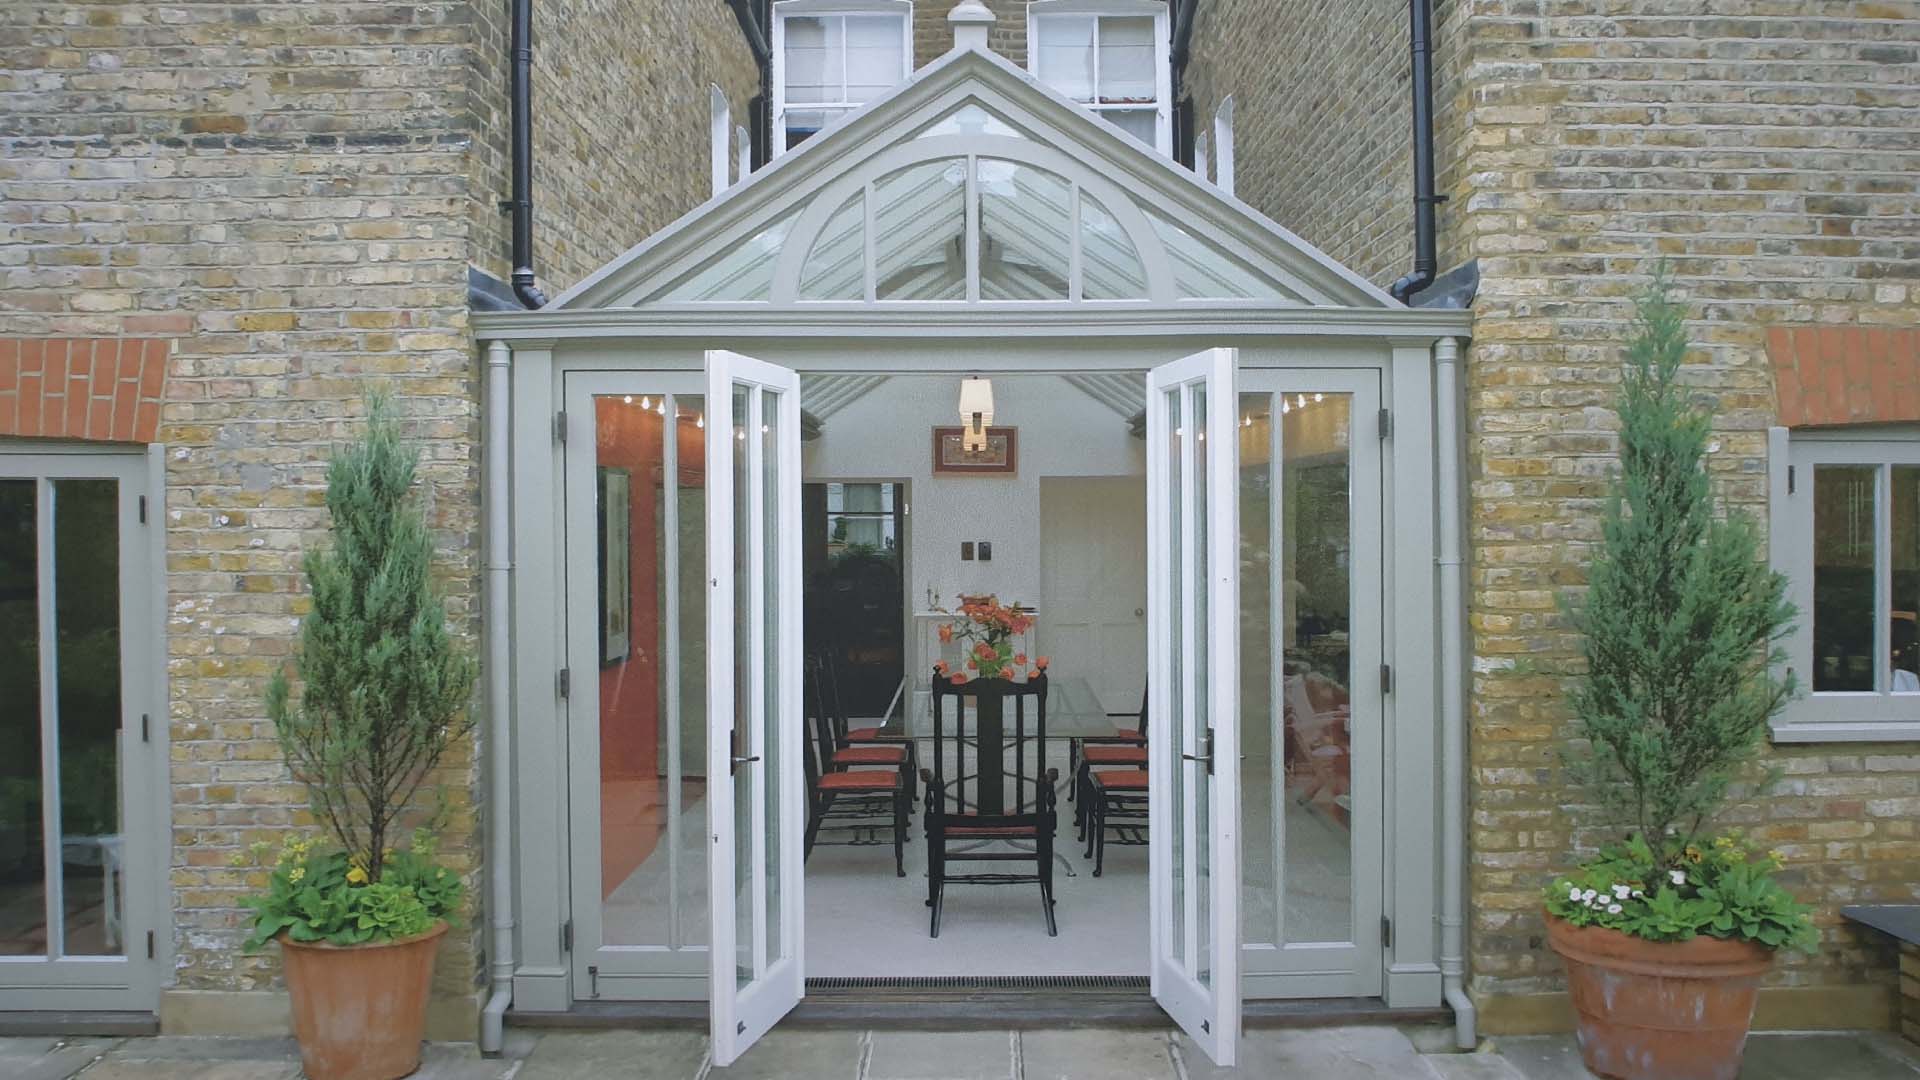 Conservatories can link homes and fill an unused gap